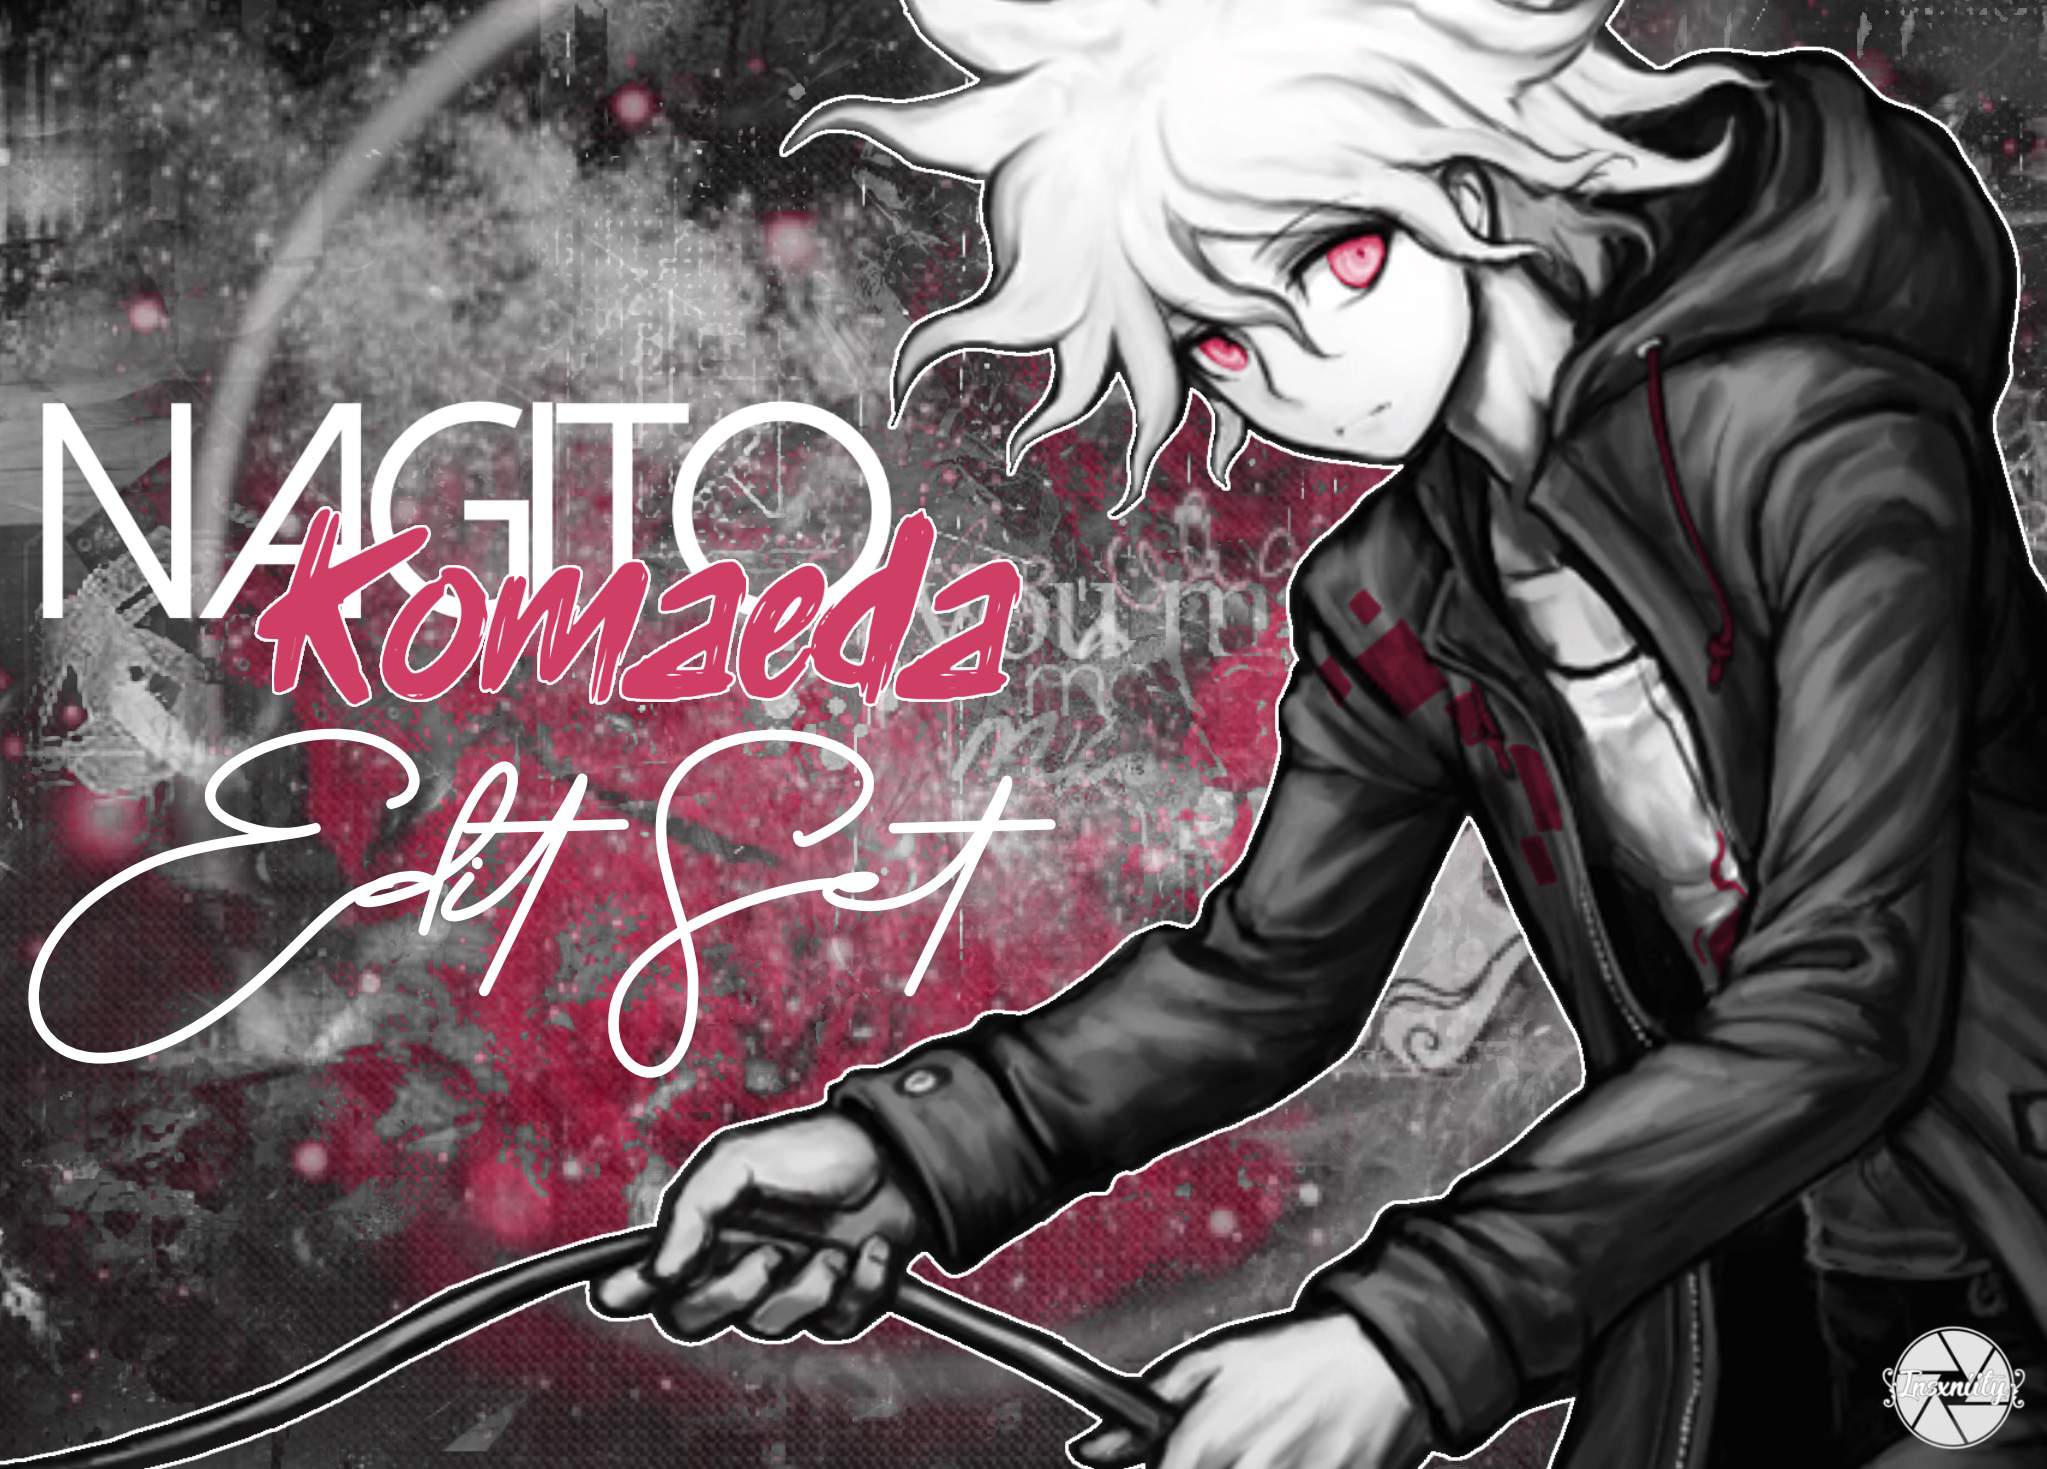 Monochrome edits of Nagito but they also have pink in them ...